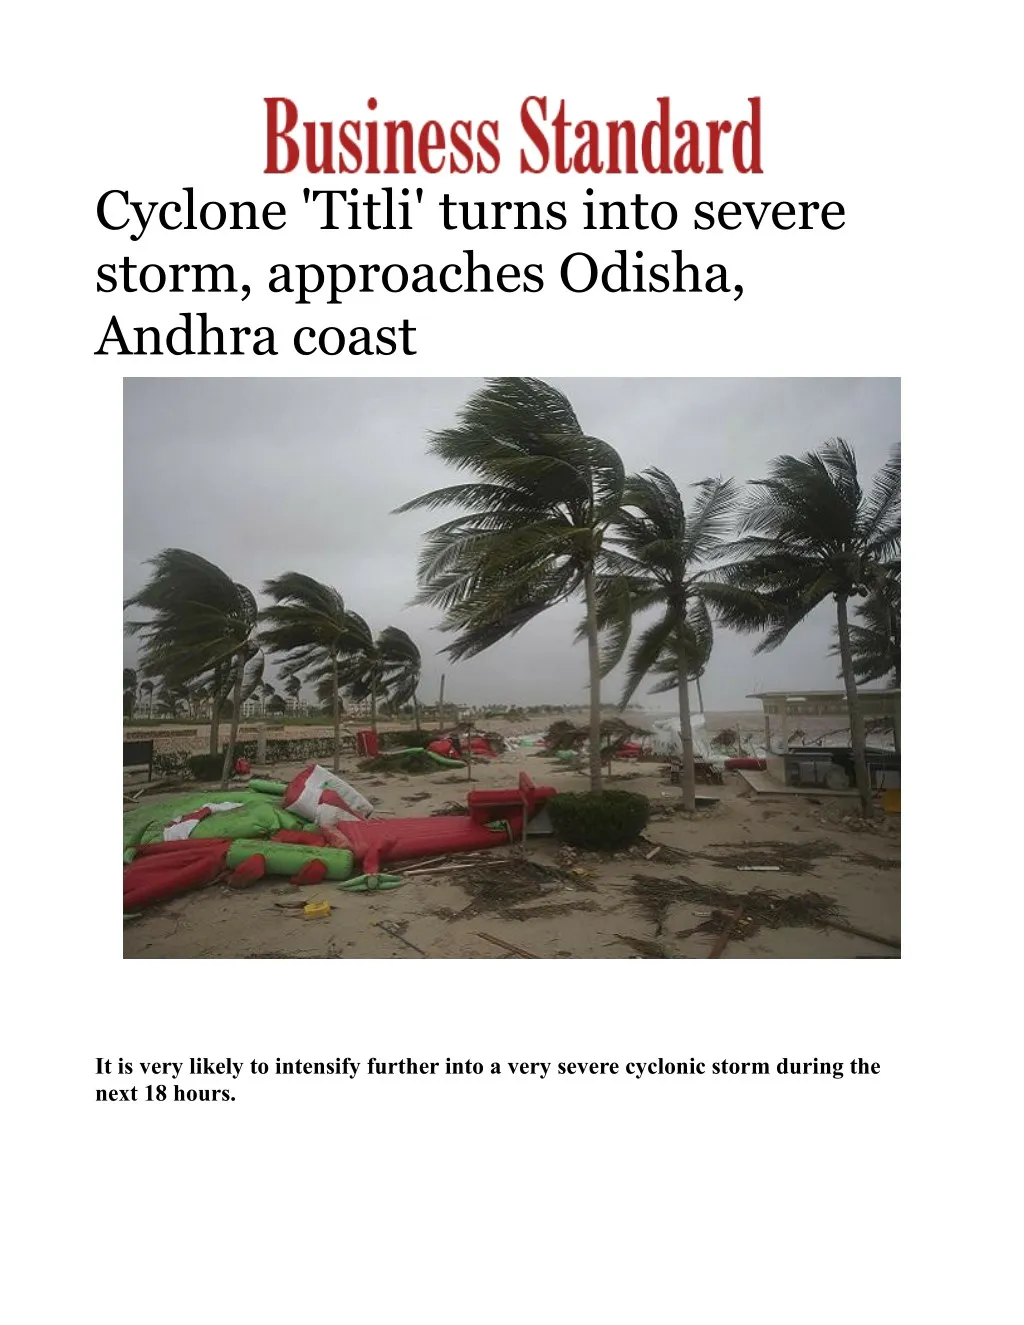 cyclone titli turns into severe storm approaches